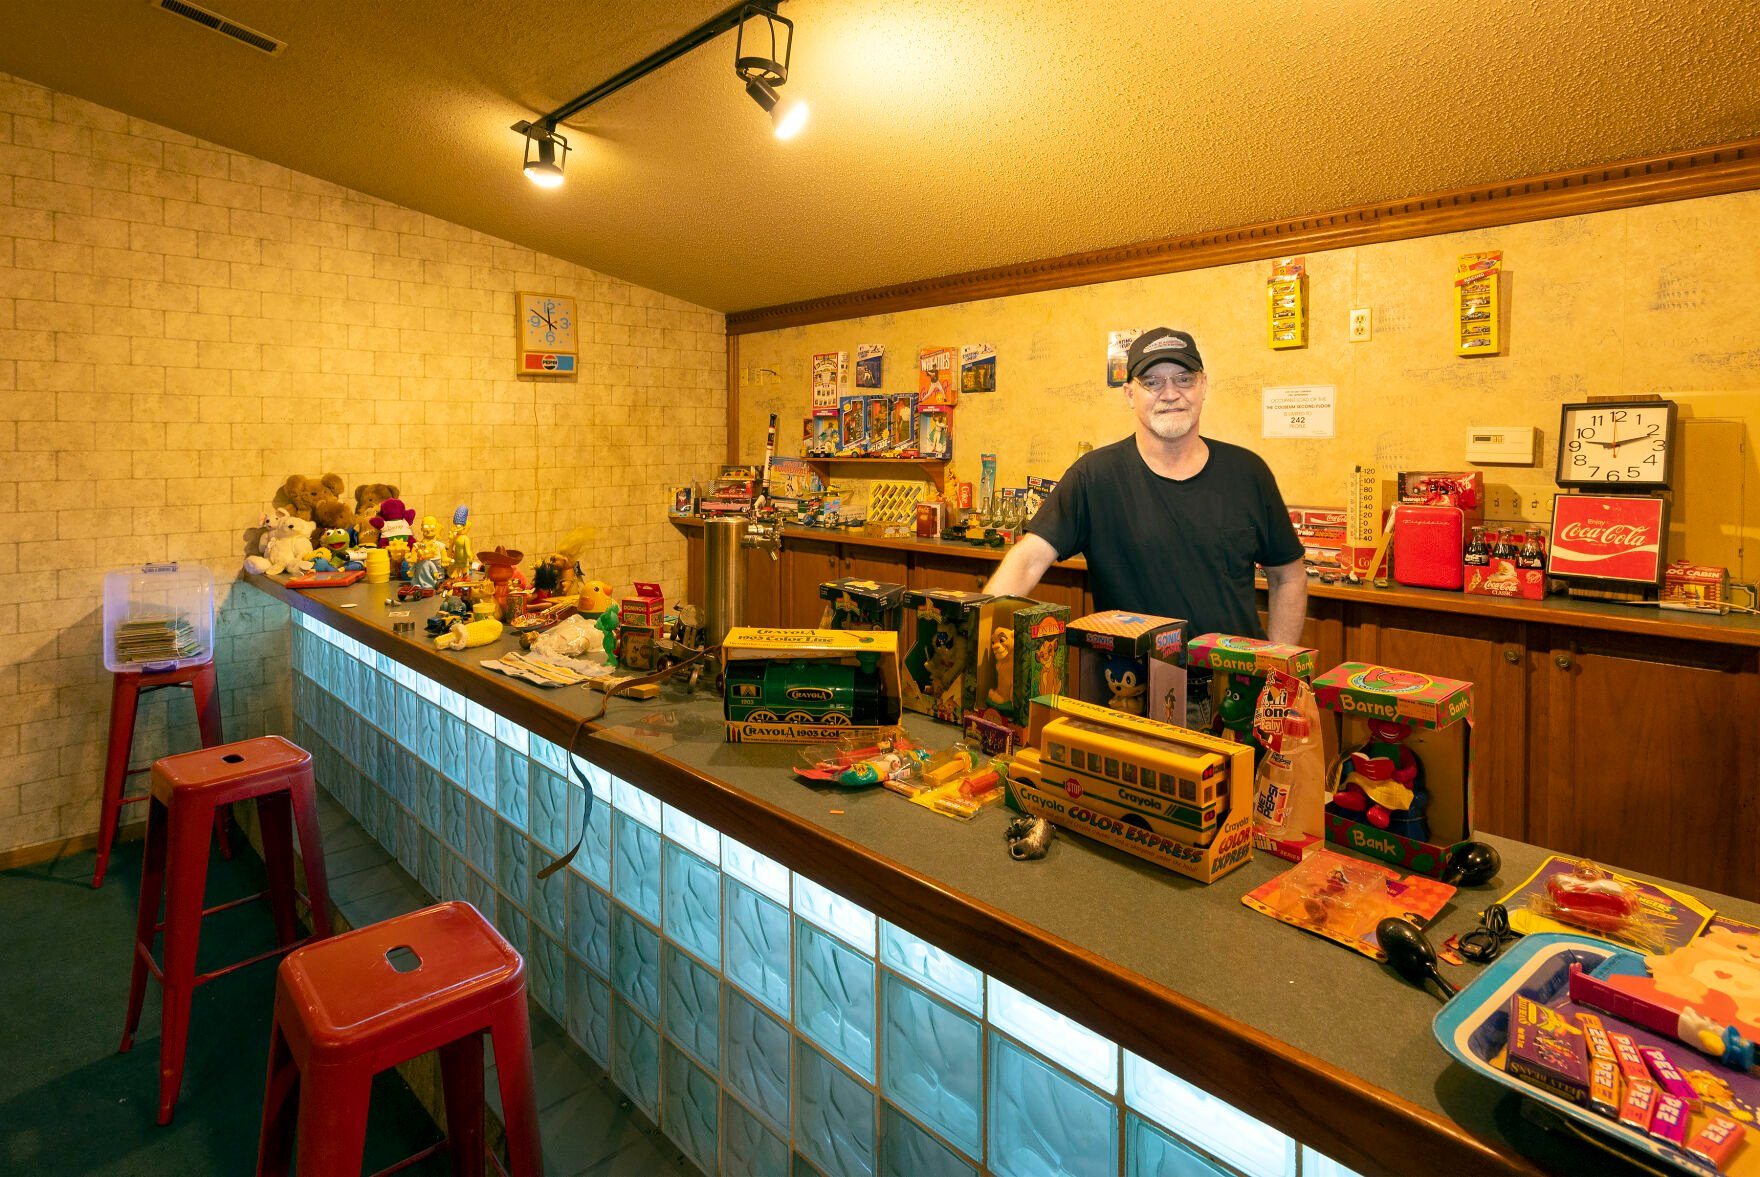 Illinois Treasure Co. co-owner Paul Knupp stands among vintage toys displayed at the store in East Dubuque, Ill., on Monday.    PHOTO CREDIT: Stephen Gassman